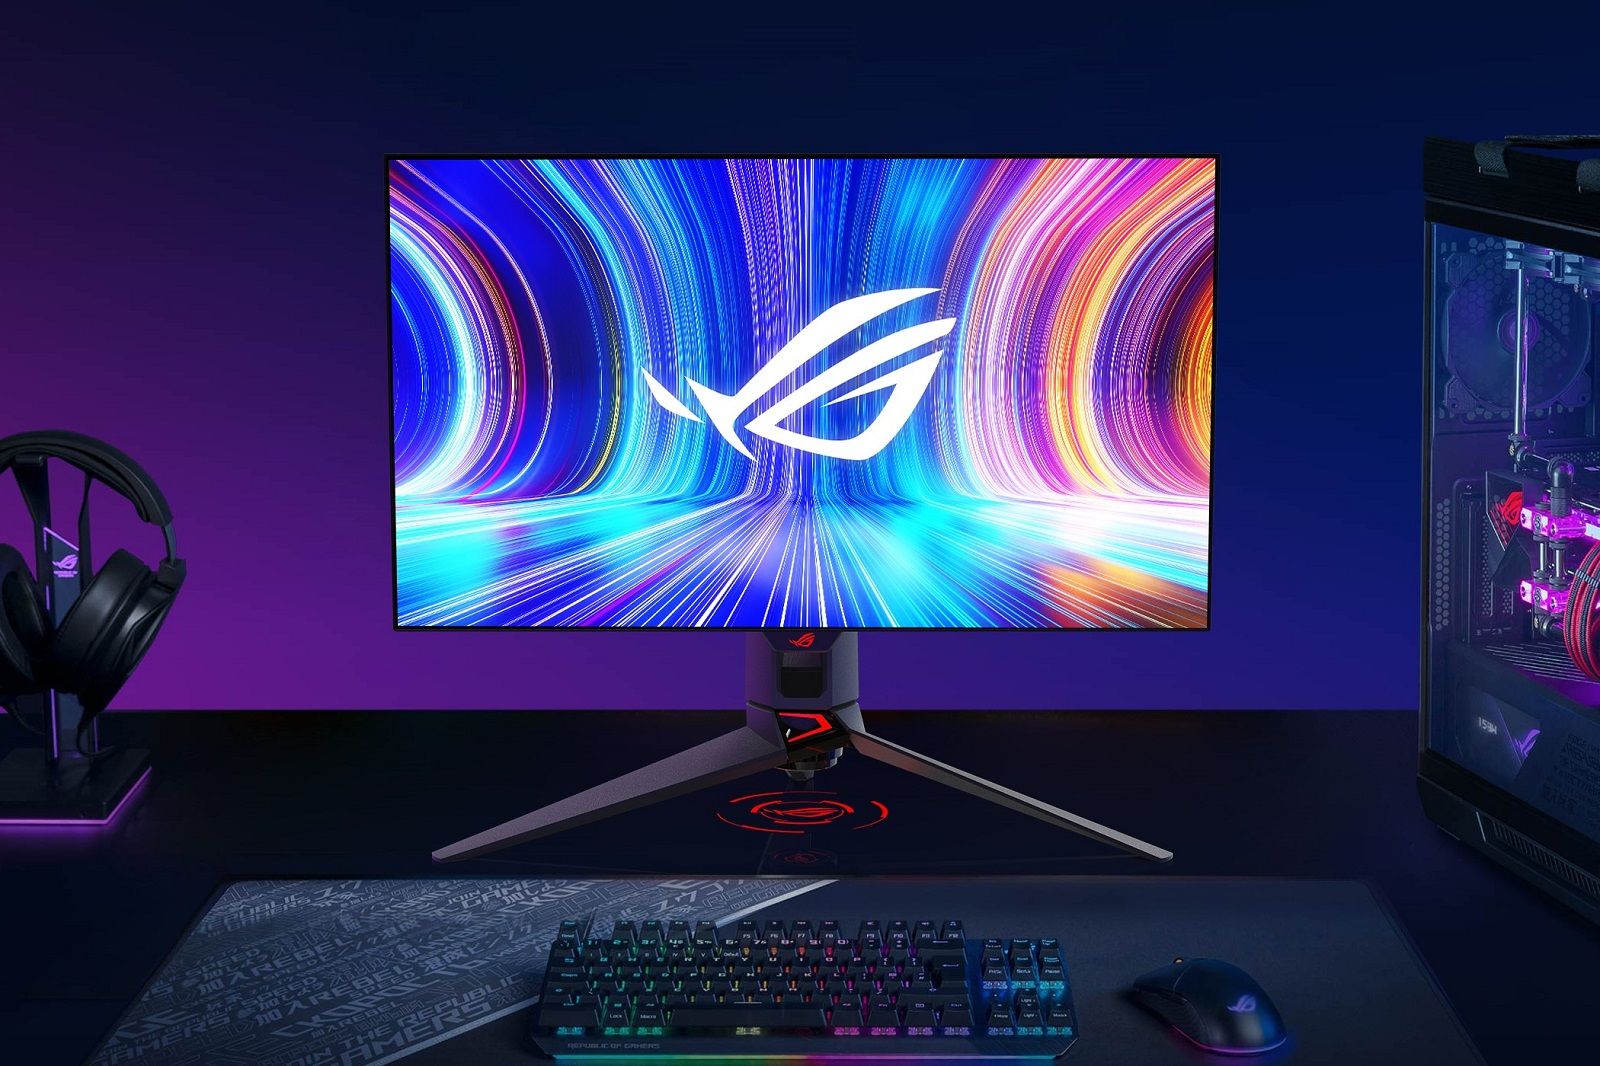 Asus gaming monitors now include an insane 540 Hz display photo 5